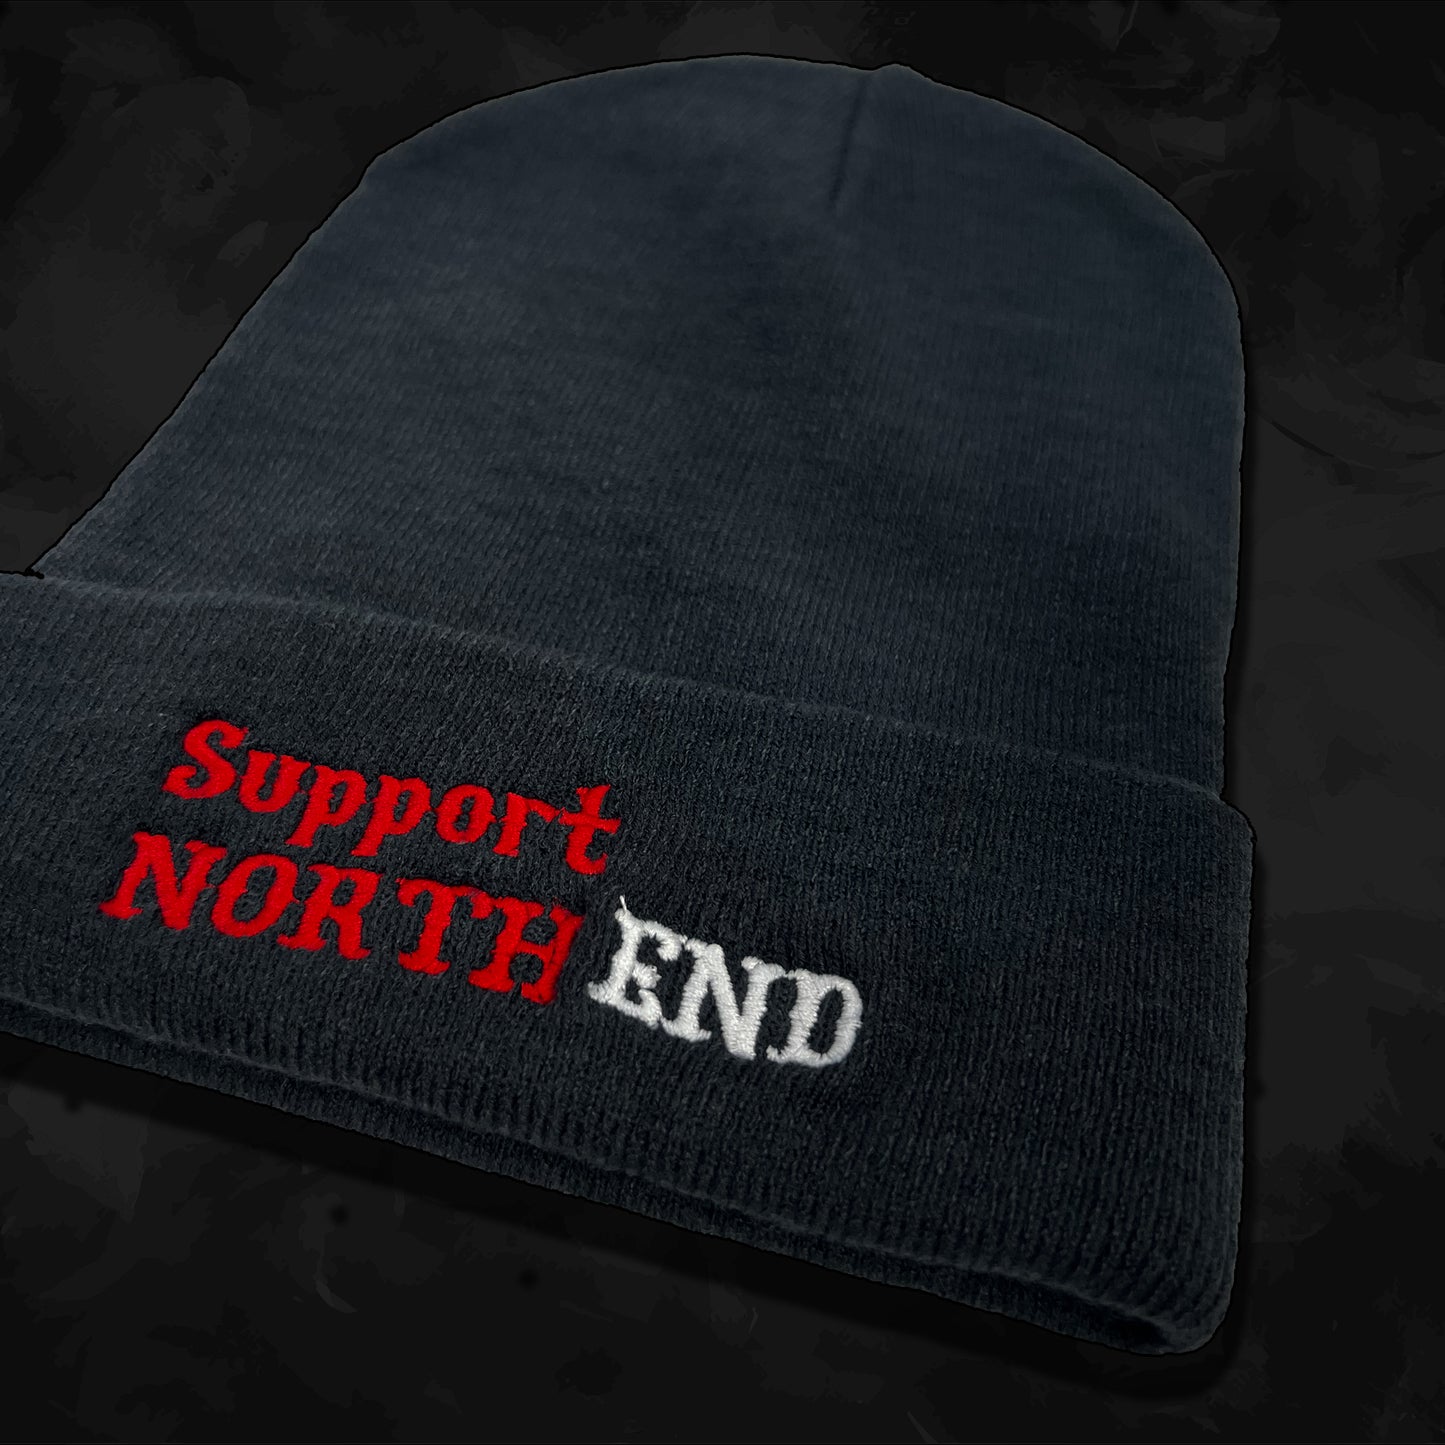 Beanie "SUPPORT 81 NORTH END"